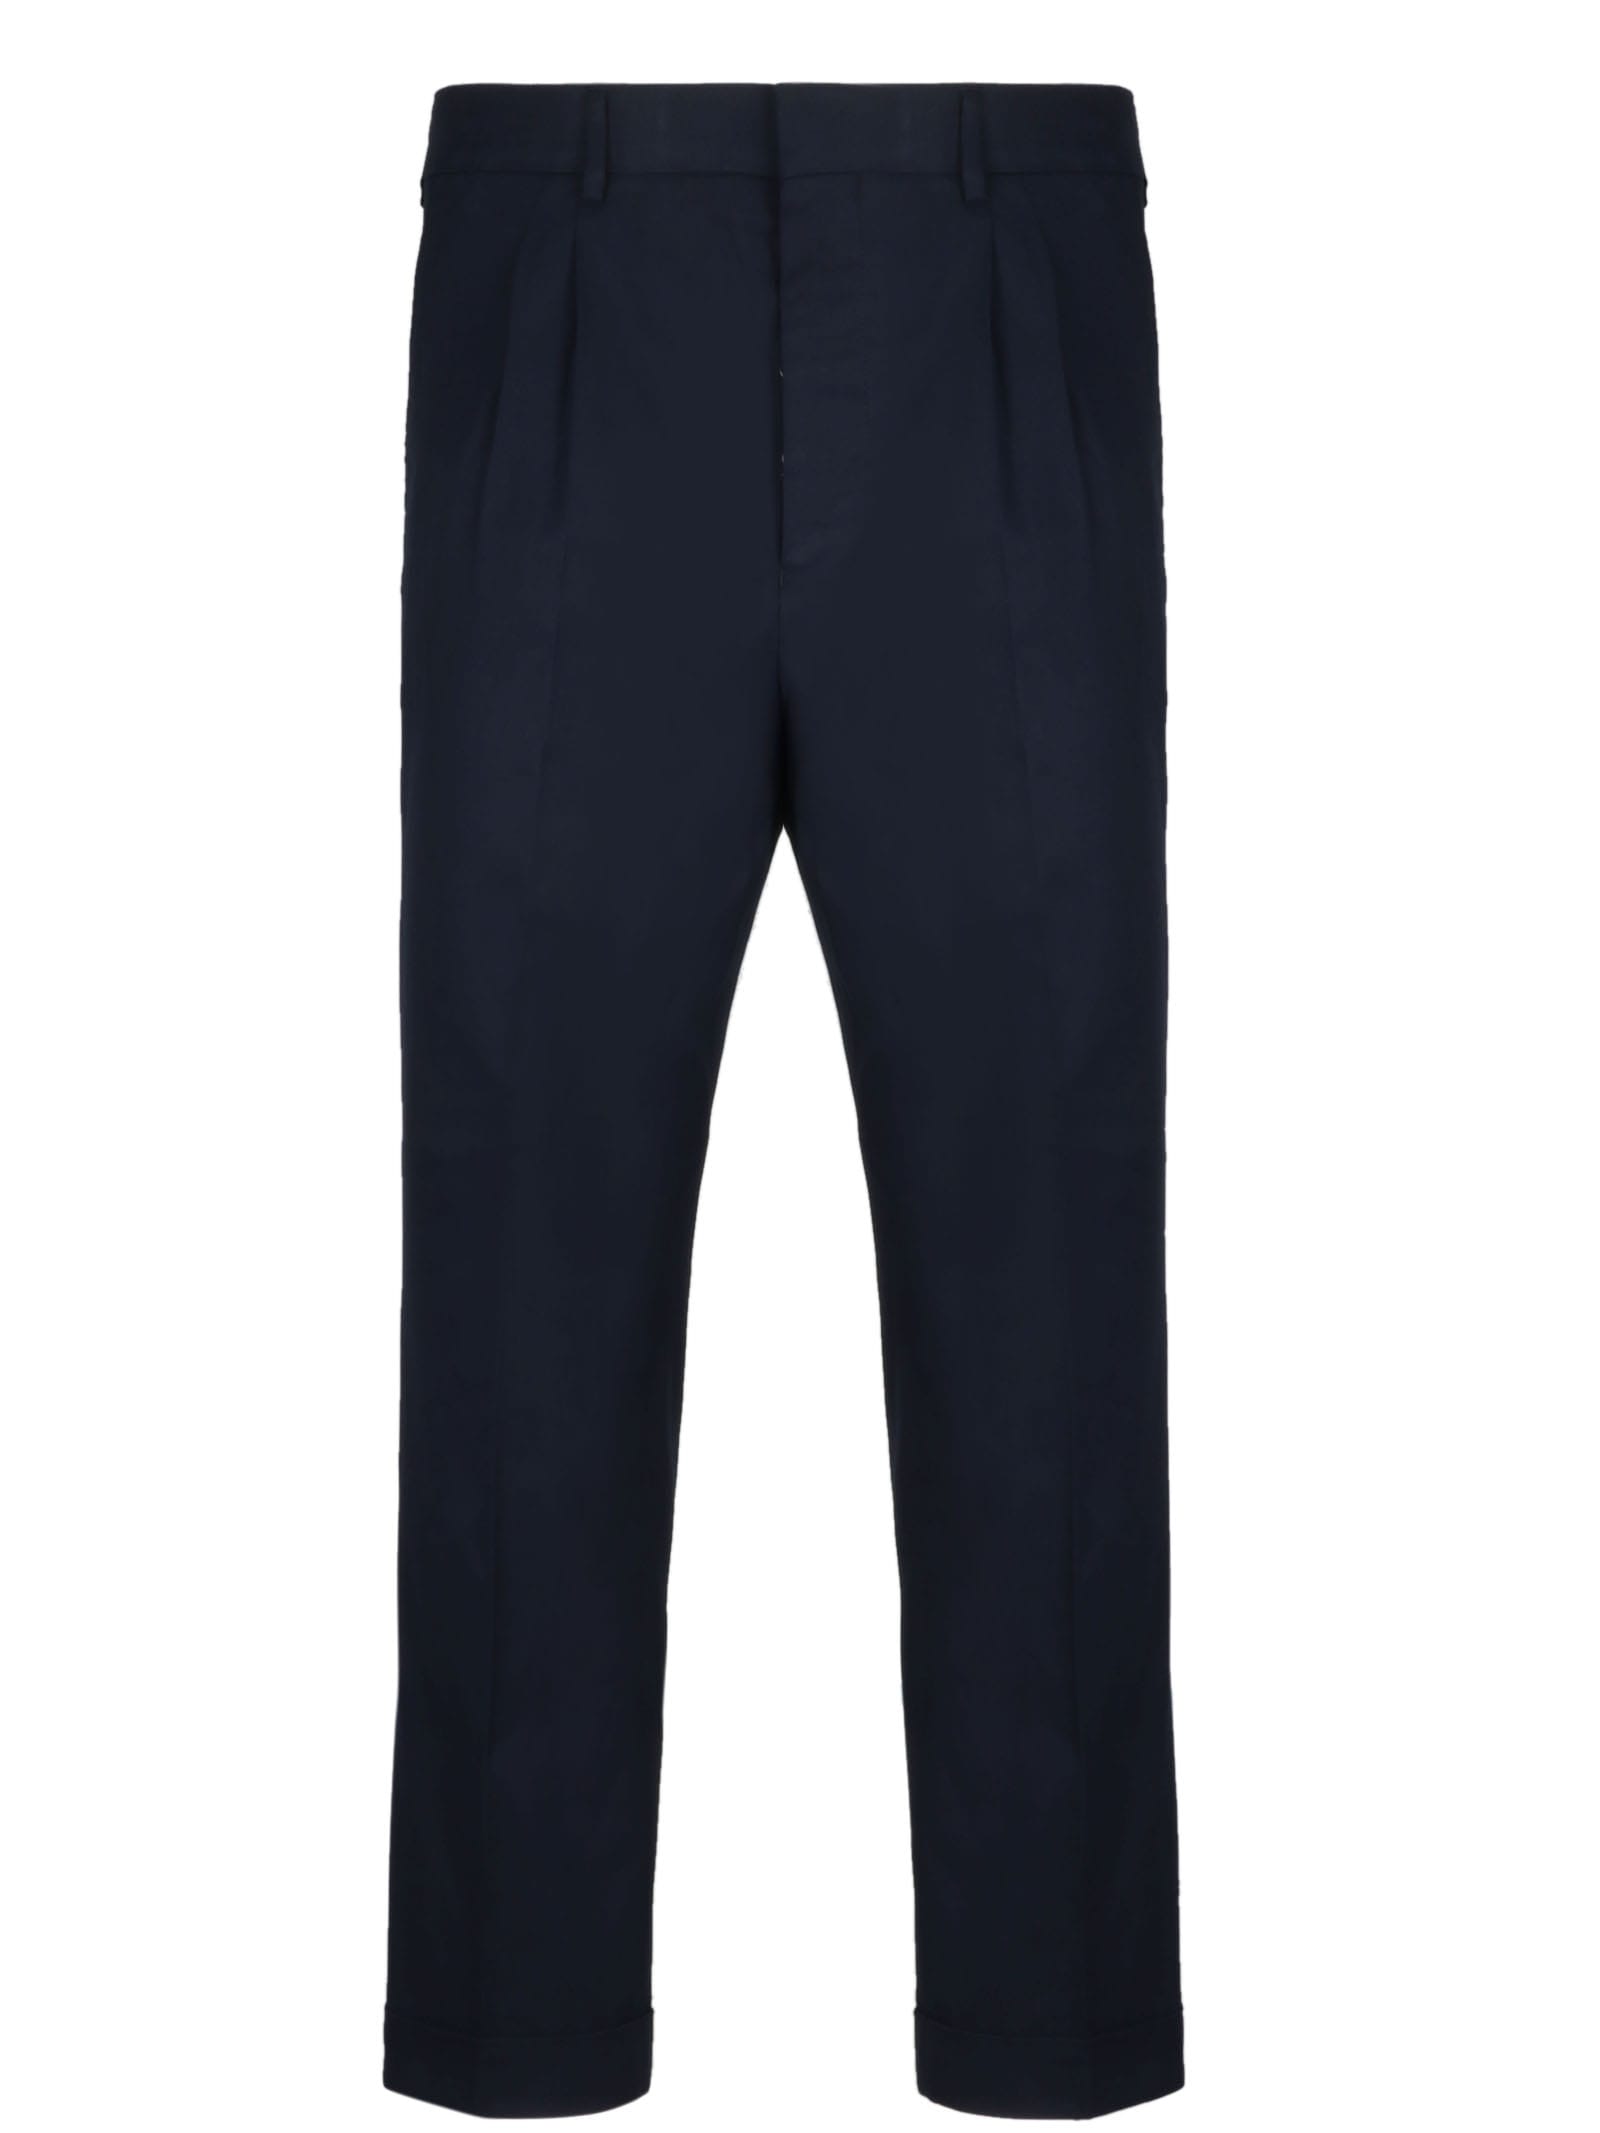 Ami Alexandre Mattiussi Ami Alexandre Mattiussi Trousers - Navy